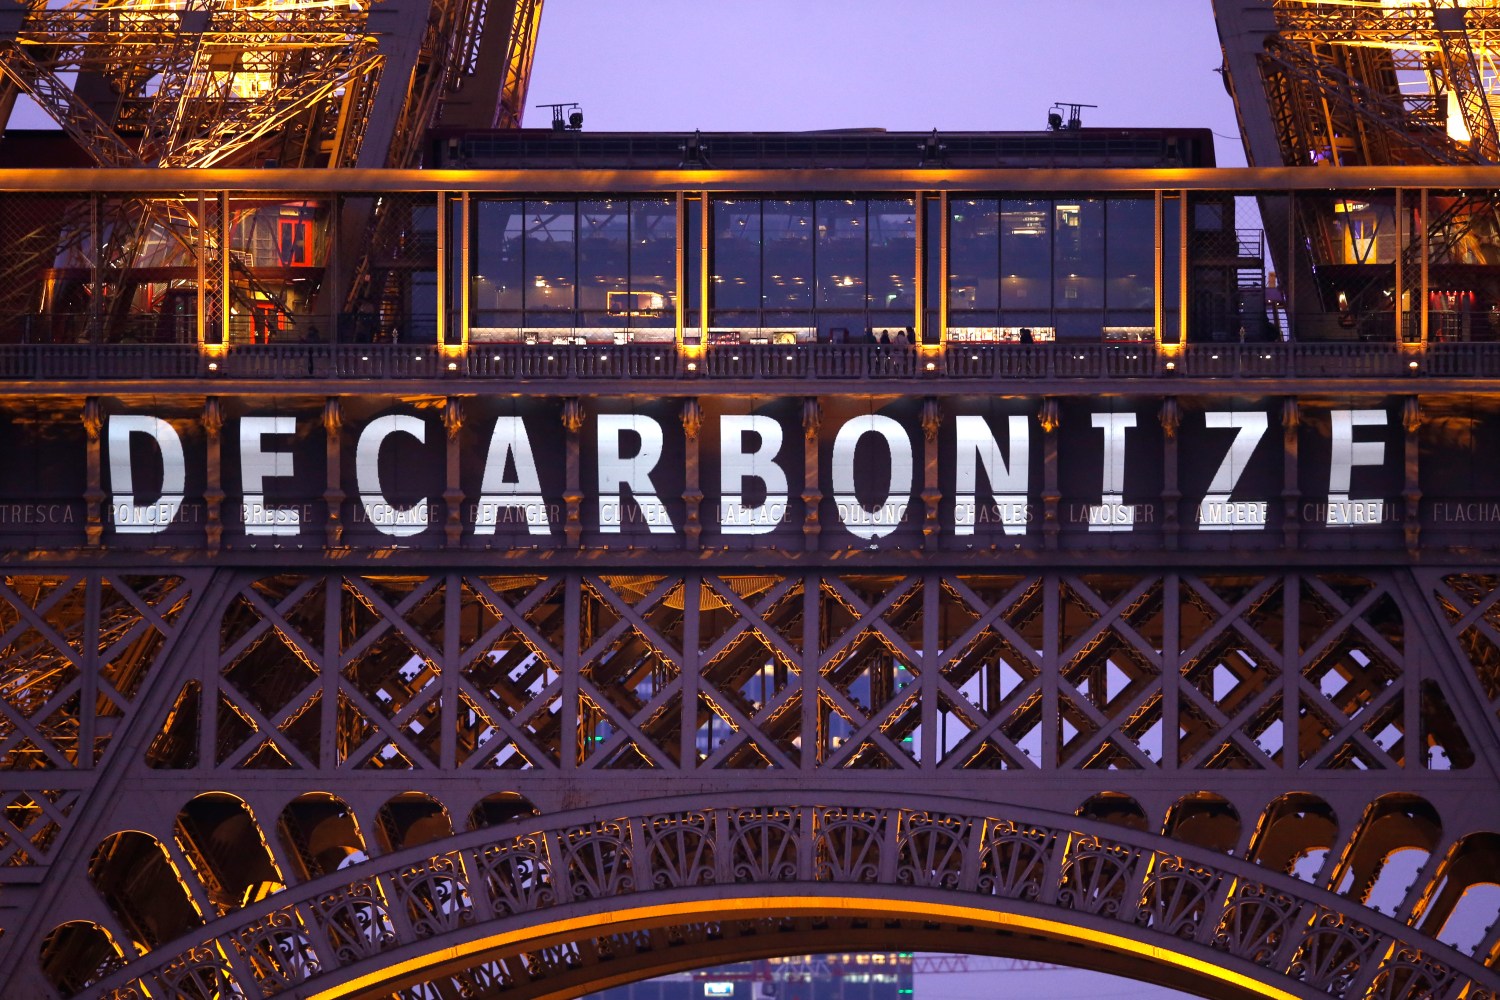 Photo: The slogan "Decarbonize" is projected on the Eiffel Tower as part of the World Climate Change Conference 2015 (COP21) in Paris, France, December 11, 2015. REUTERS/Charles Platiau - LR1EBCB1BVQ2S